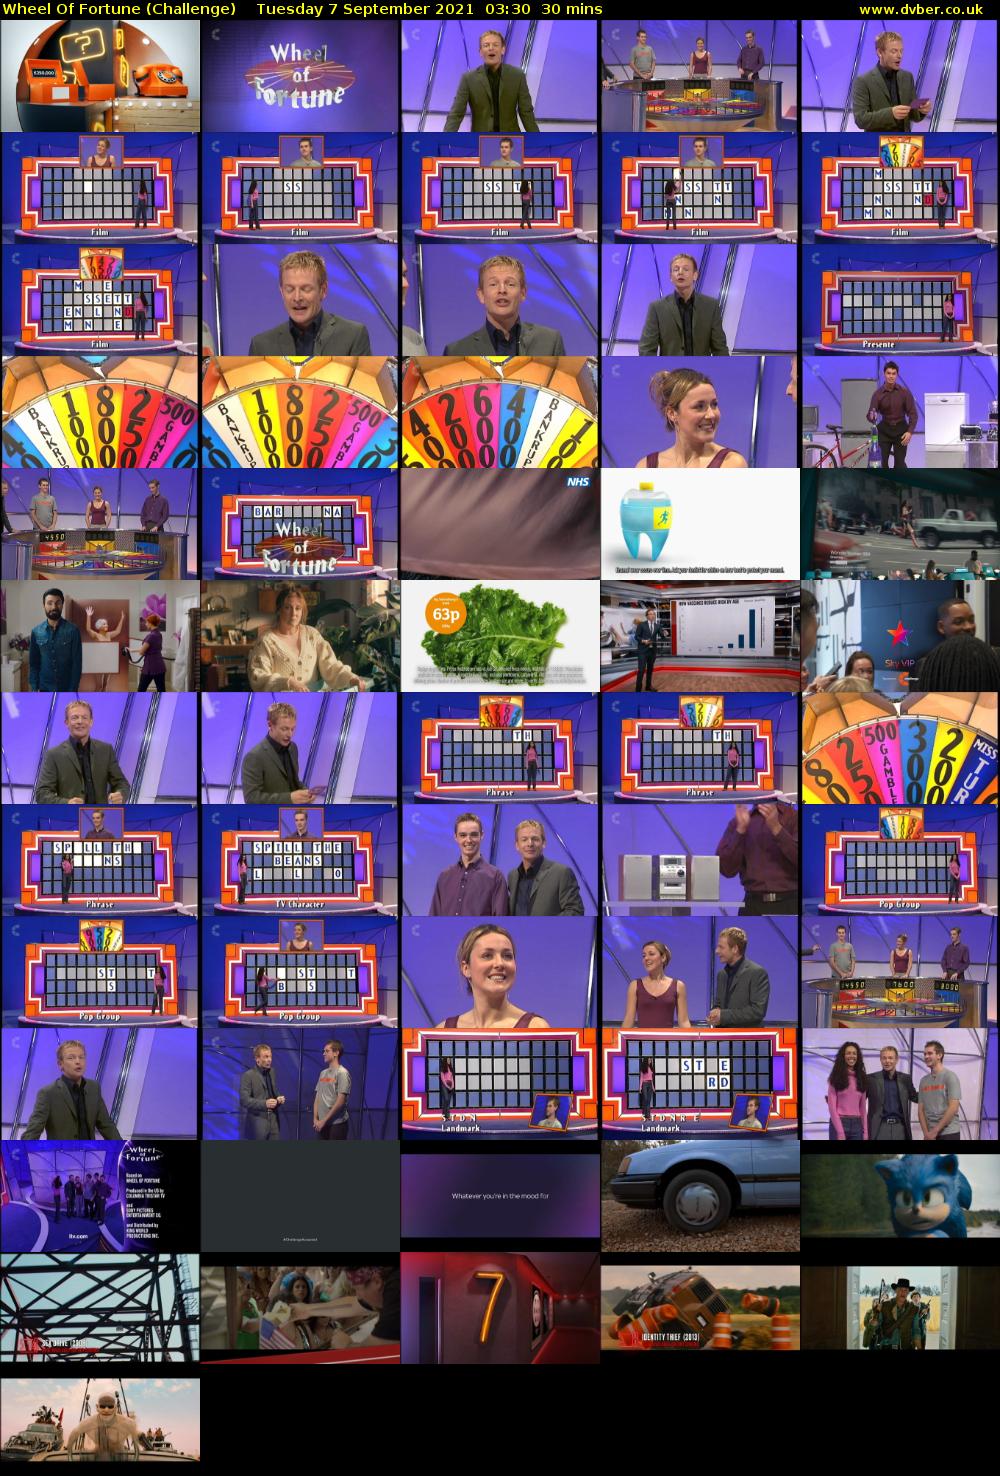 Wheel Of Fortune (Challenge) Tuesday 7 September 2021 04:30 - 05:00